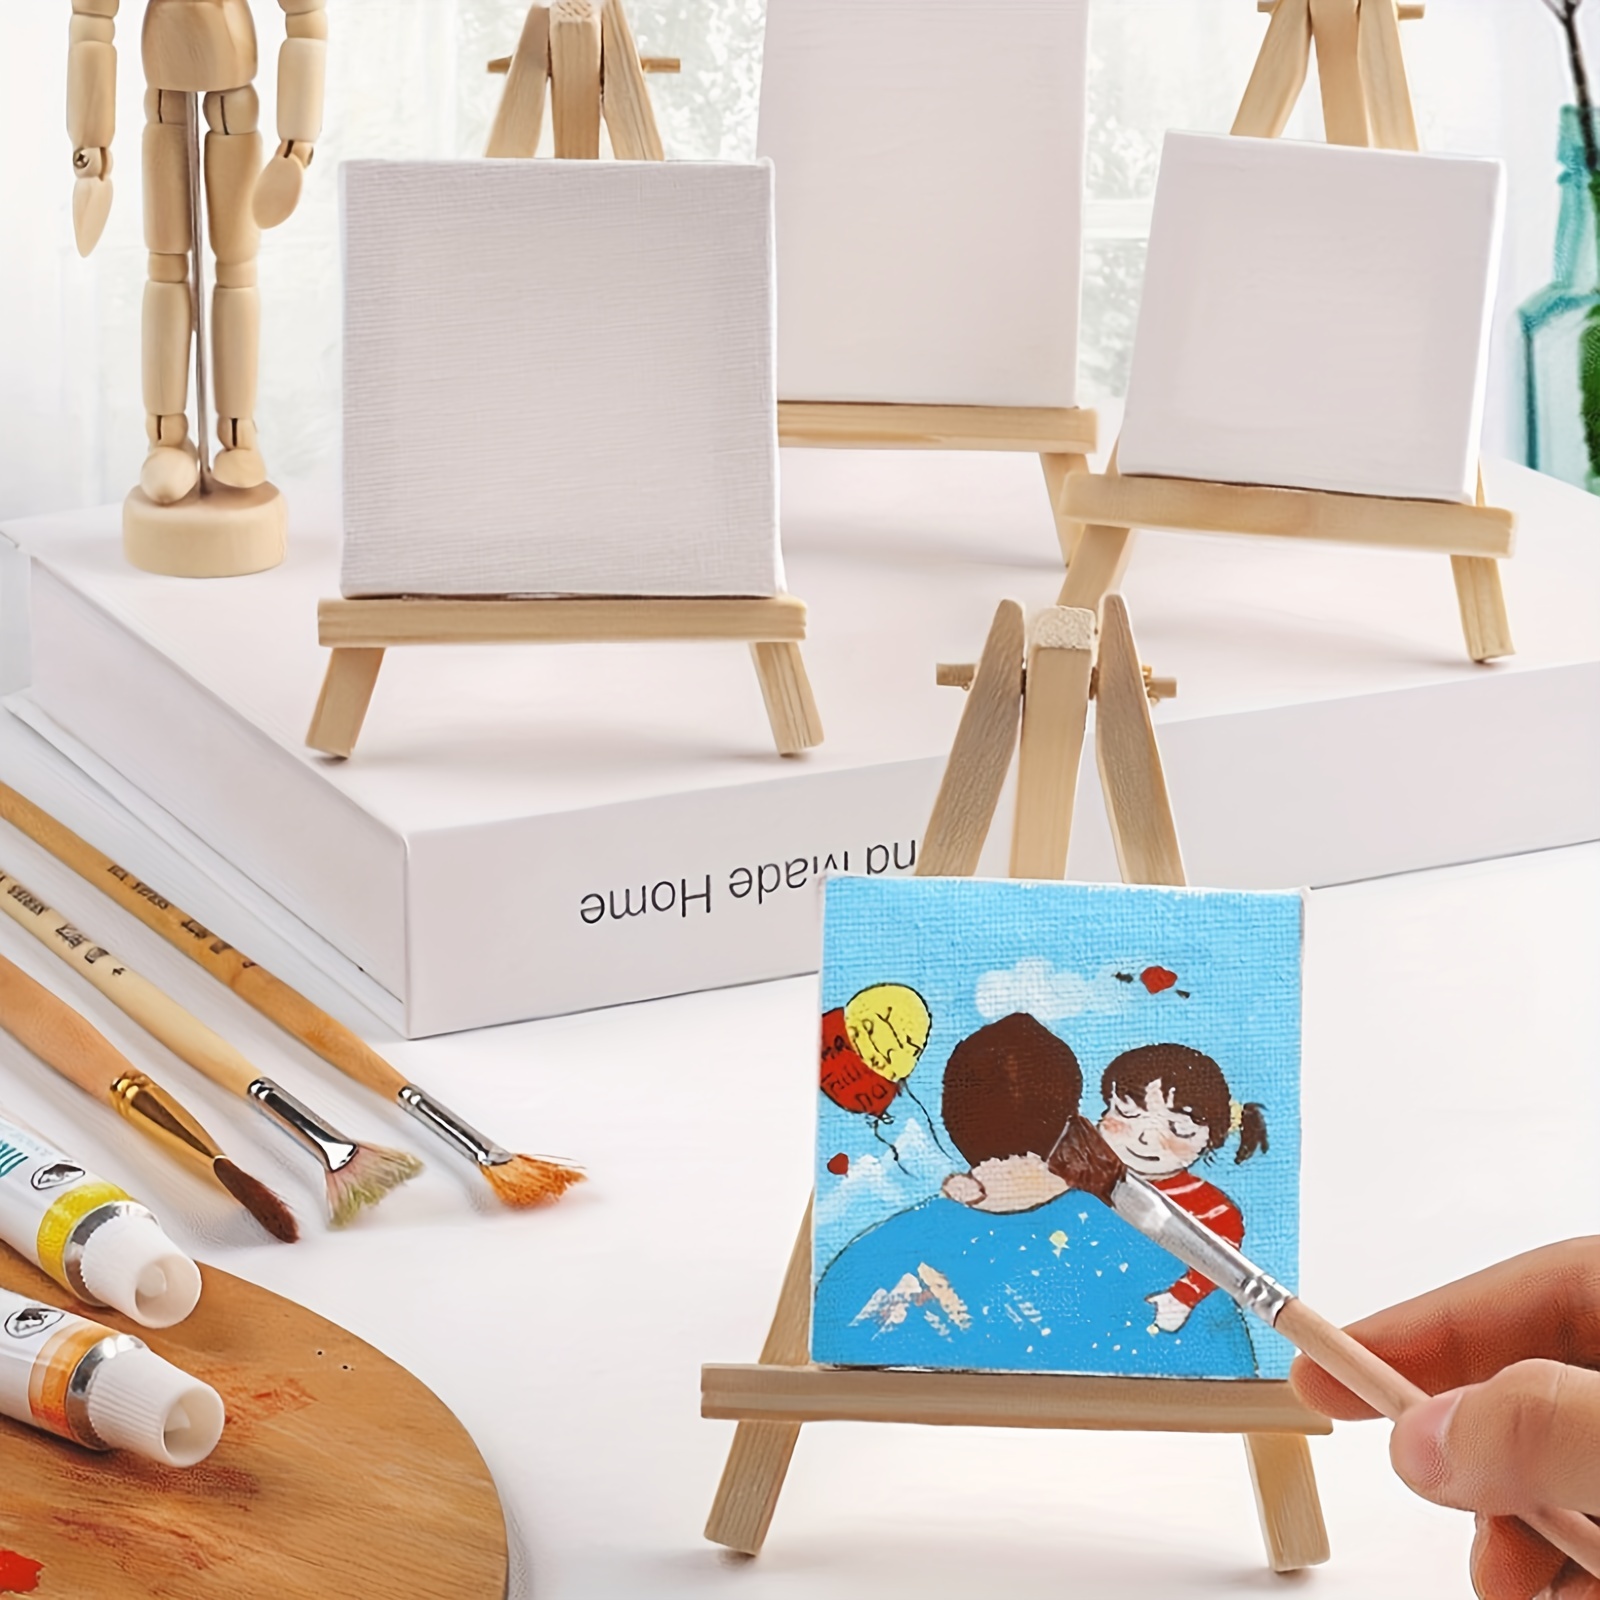 AOOKMIYA 12 Sets Mini Easels with Canvas Boards Small Easel Stands wit